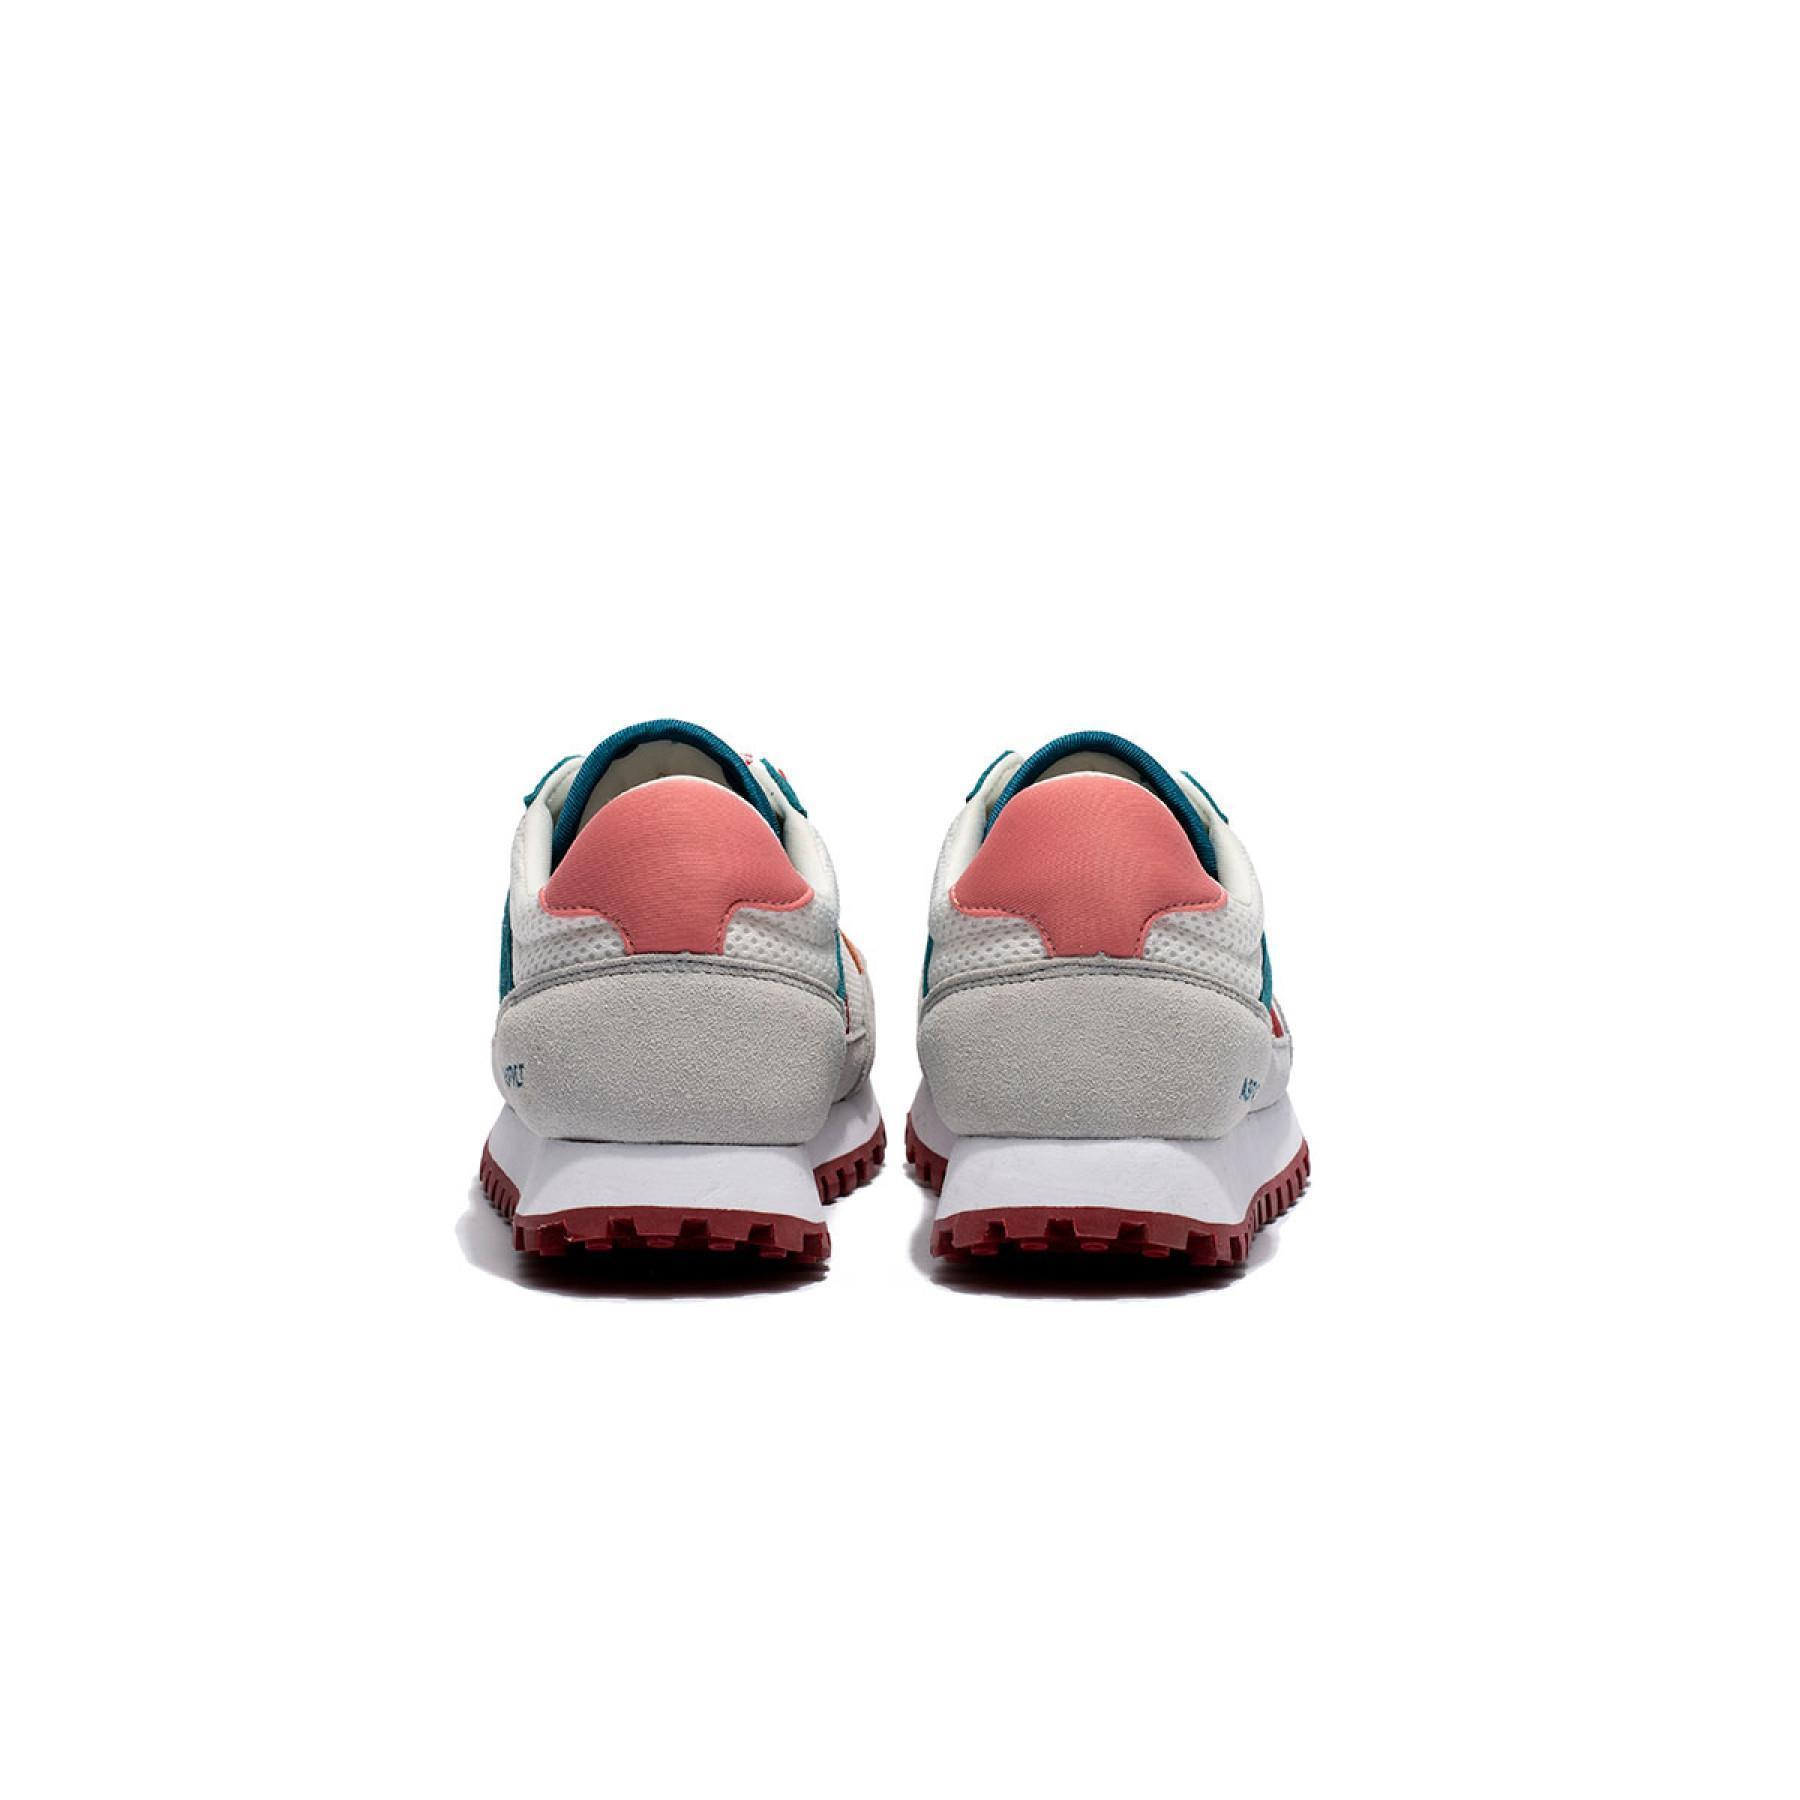 Sneakers Woman ASFVLT Chase